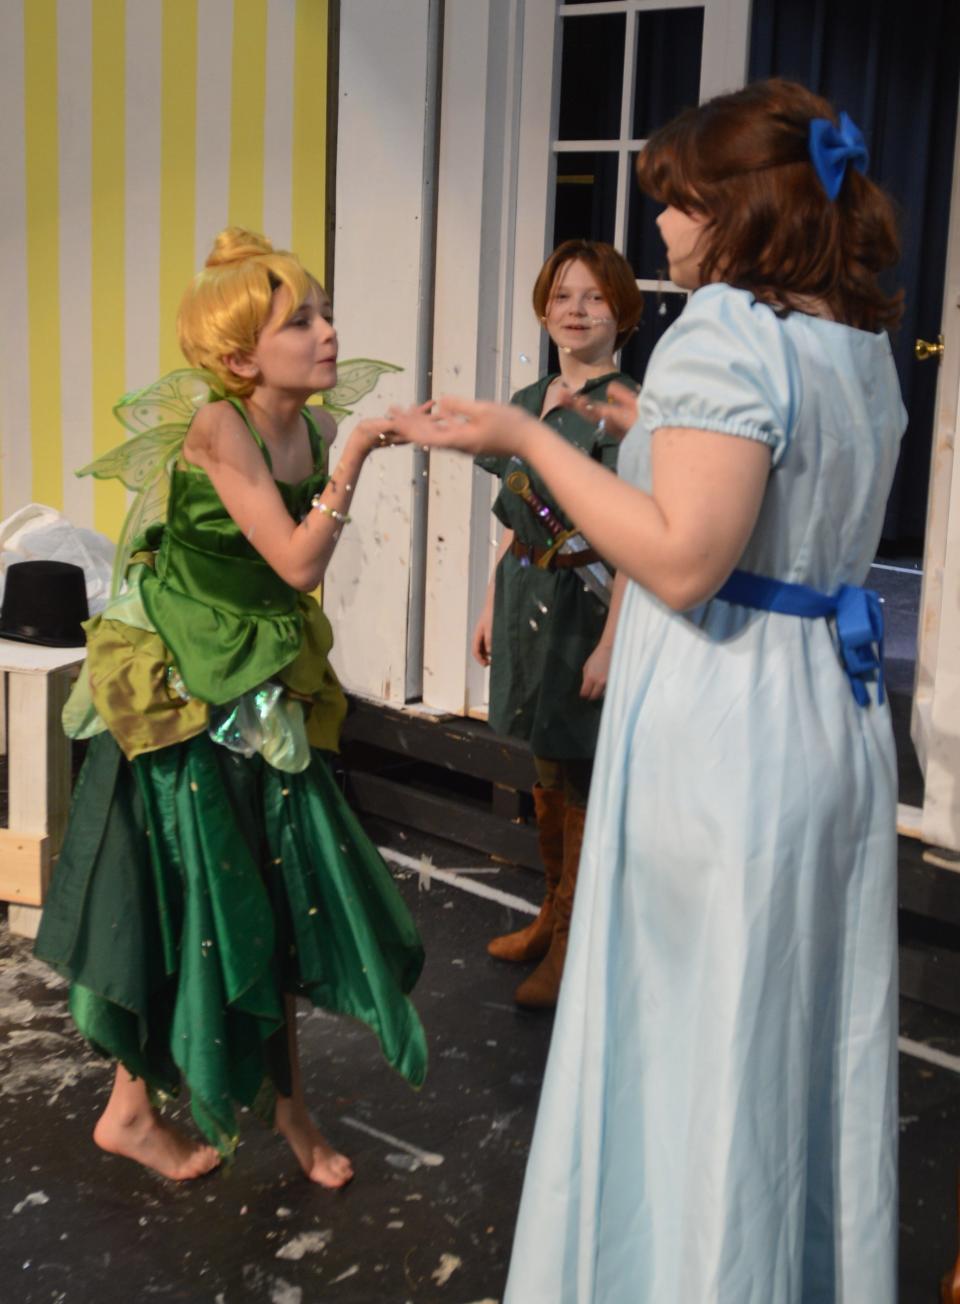 Tinkerbell gives Wendy her share of pixie dust.